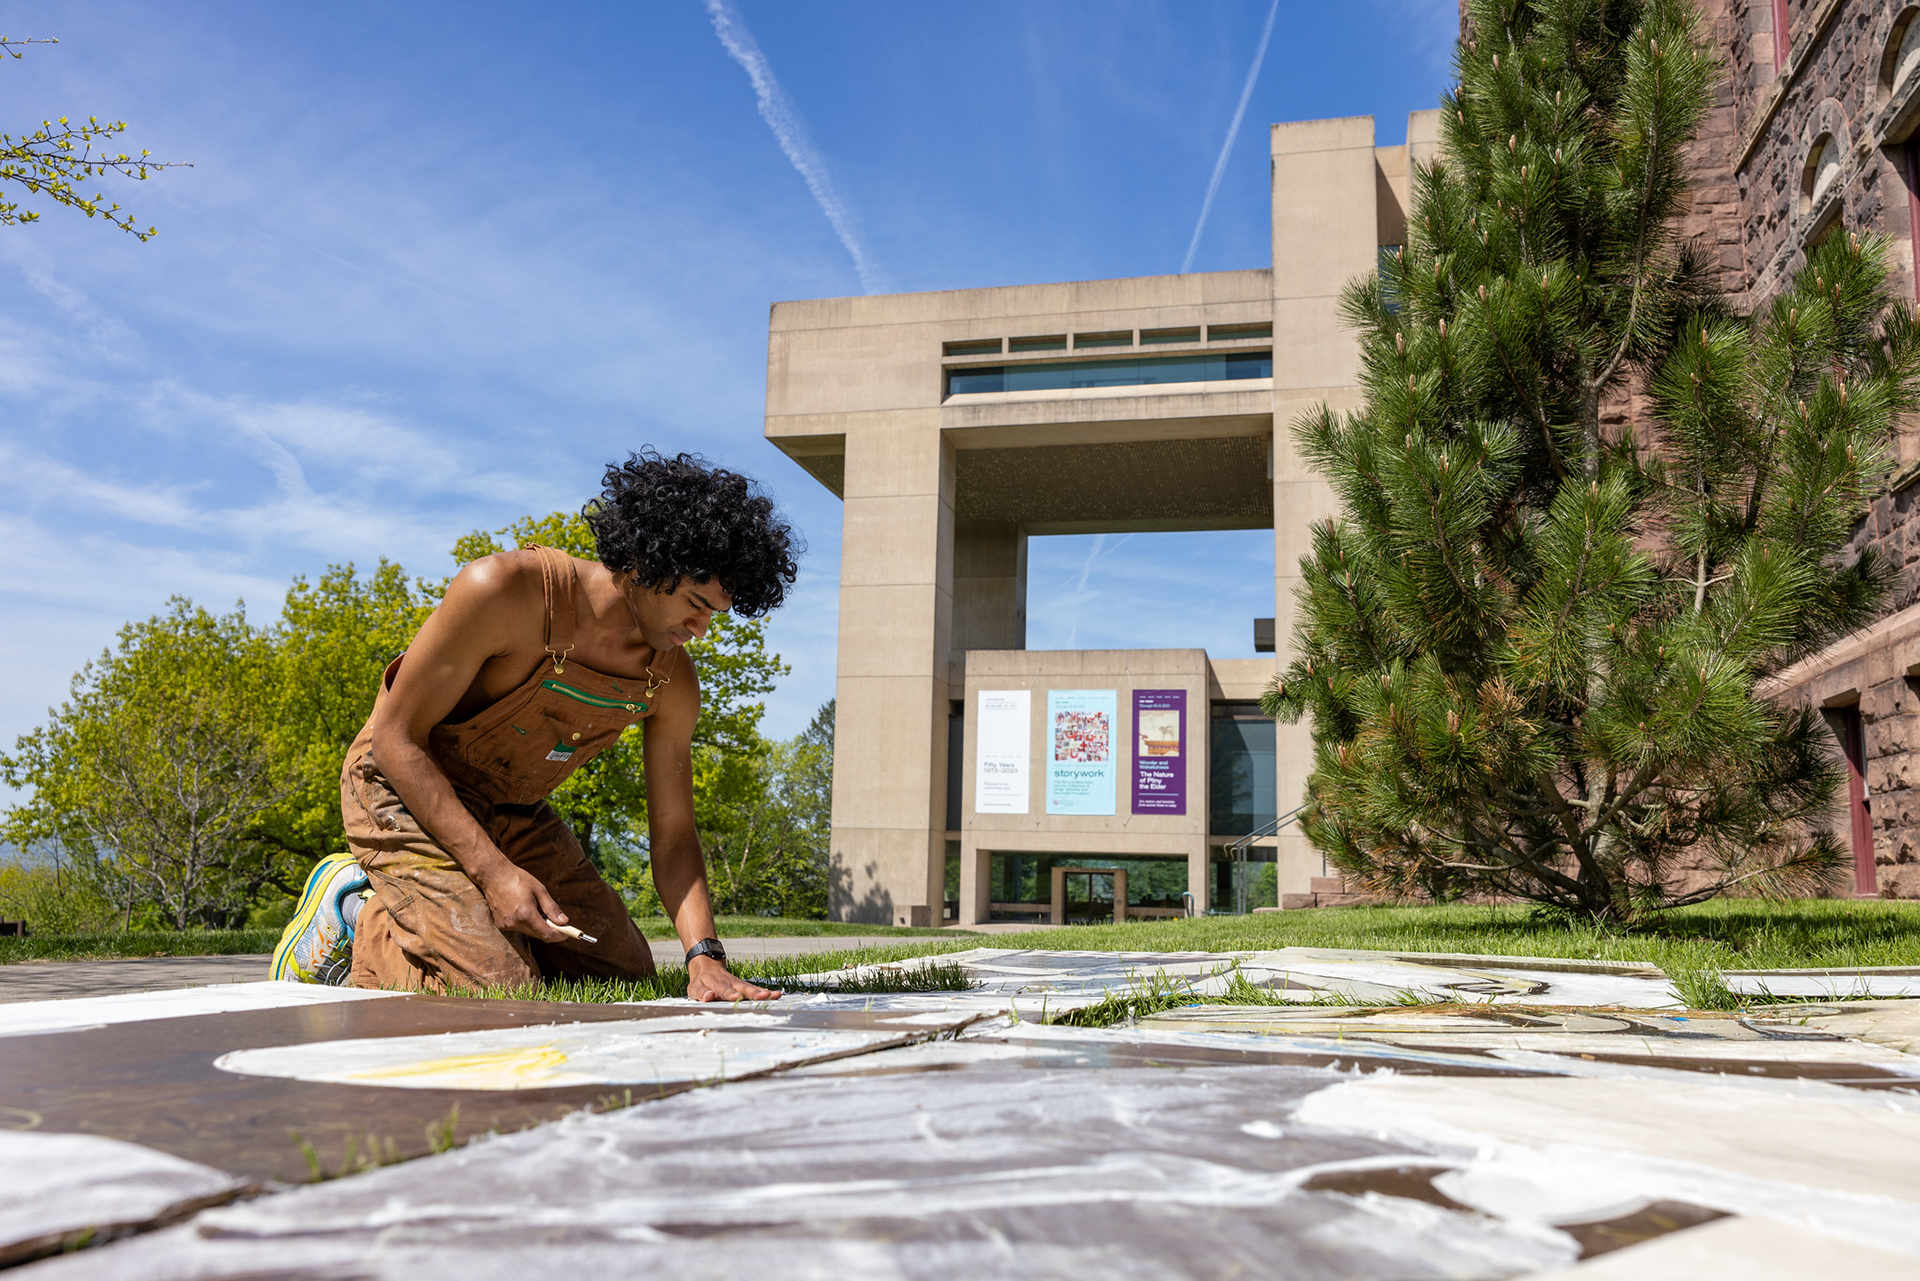 https://aap.cornell.edu/Student%20wearing%20overalls%20kneeling%20in%20the%20grass%20working%20on%20an%20art%20project